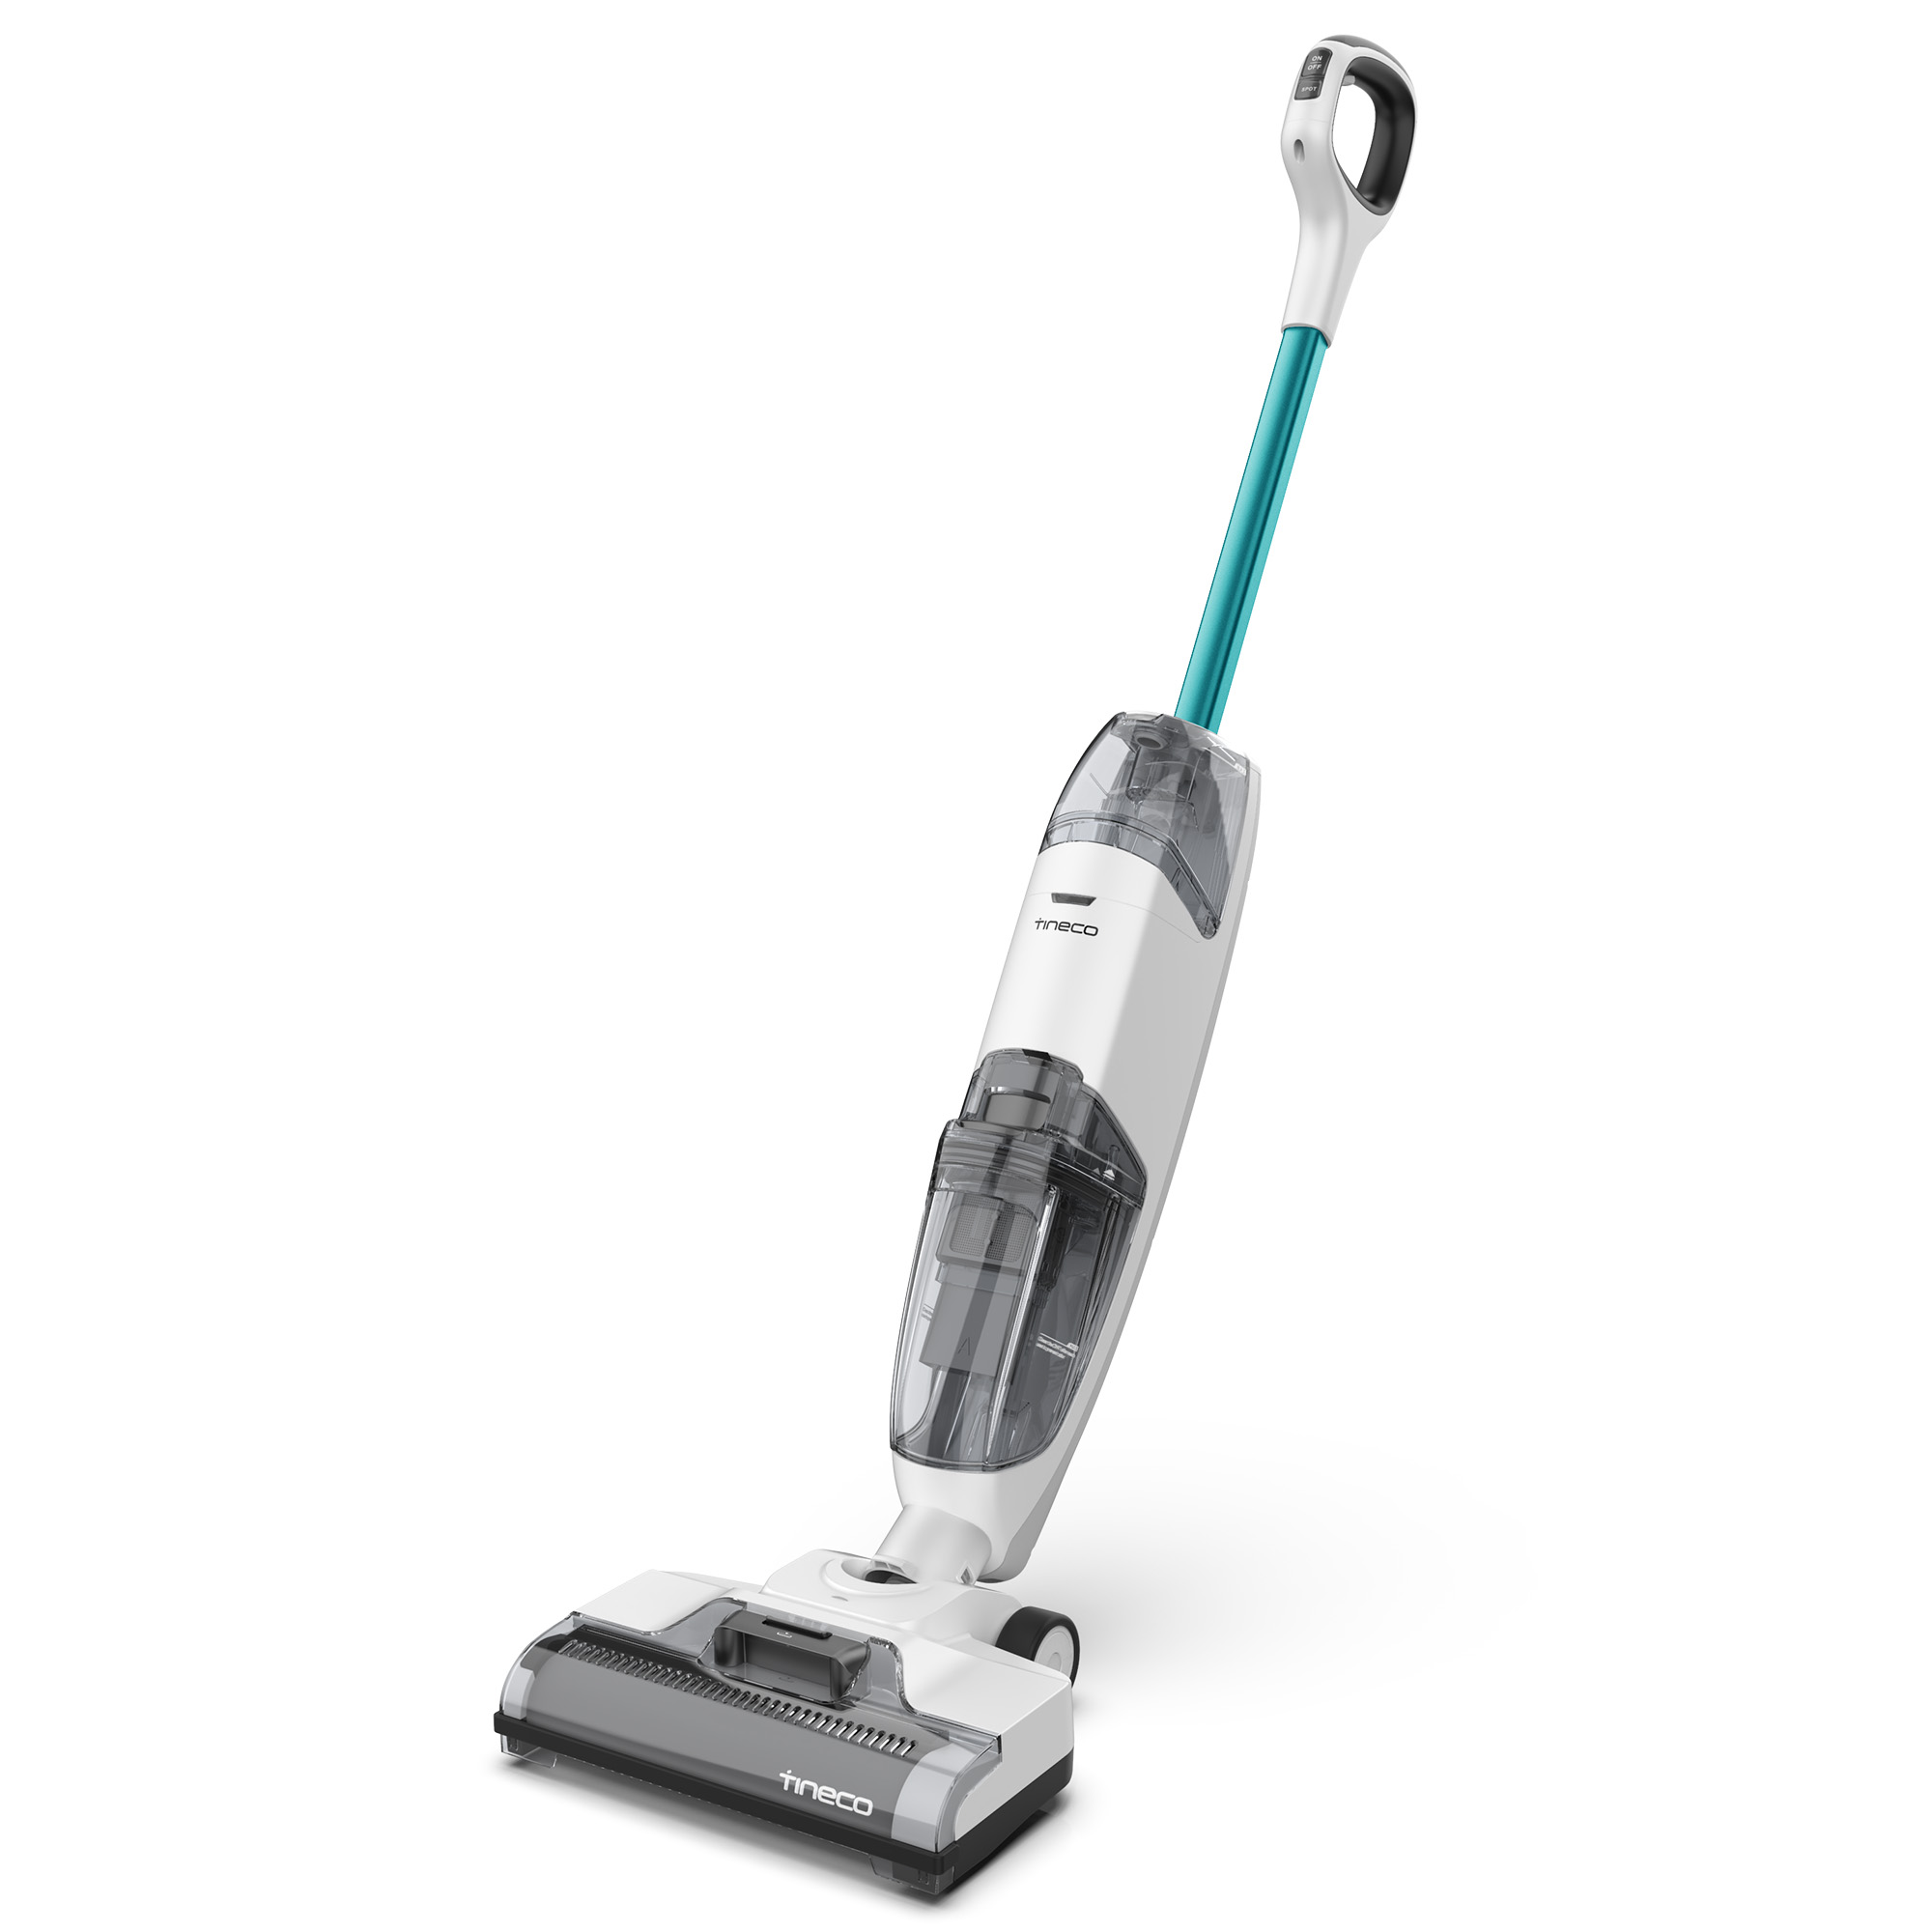 Tineco iFloor 2 Max Cordless Wet/Dry Vacuum Cleaner and Hard Floor Washer - Limited Edition (Blue) - image 1 of 6